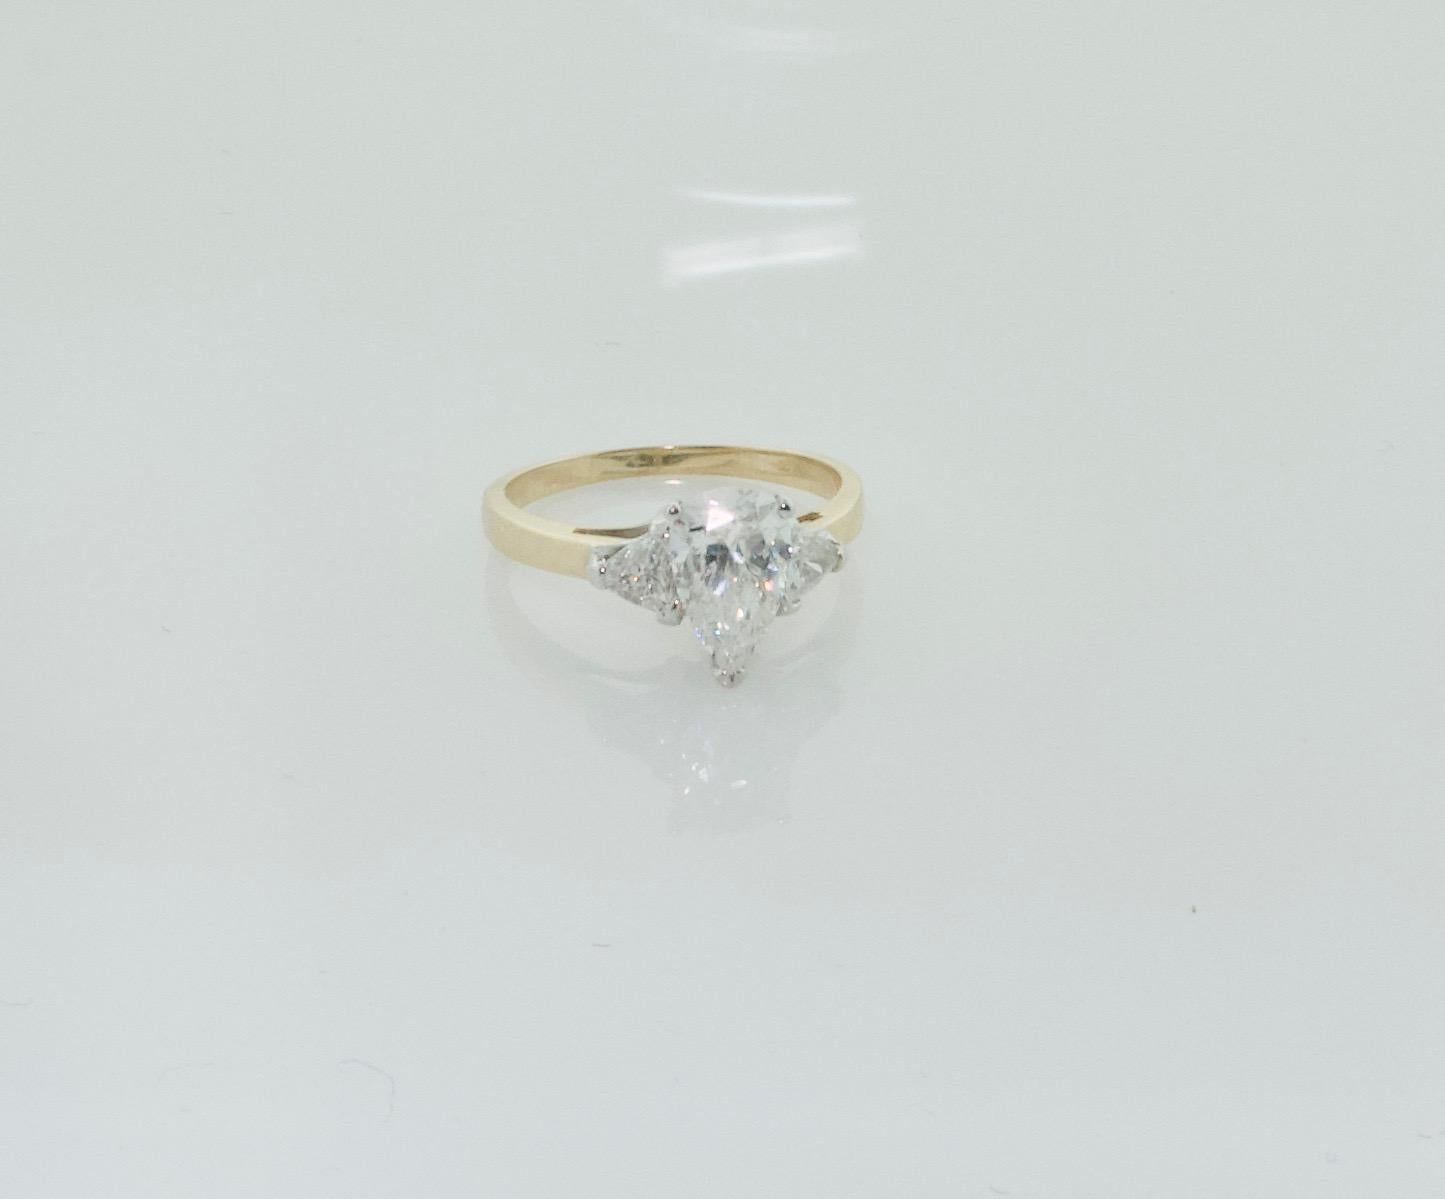 Pear Shape Diamond Engagement Ring 1.23 Carats GIA GVS2 in 18k Gold In Excellent Condition For Sale In Wailea, HI